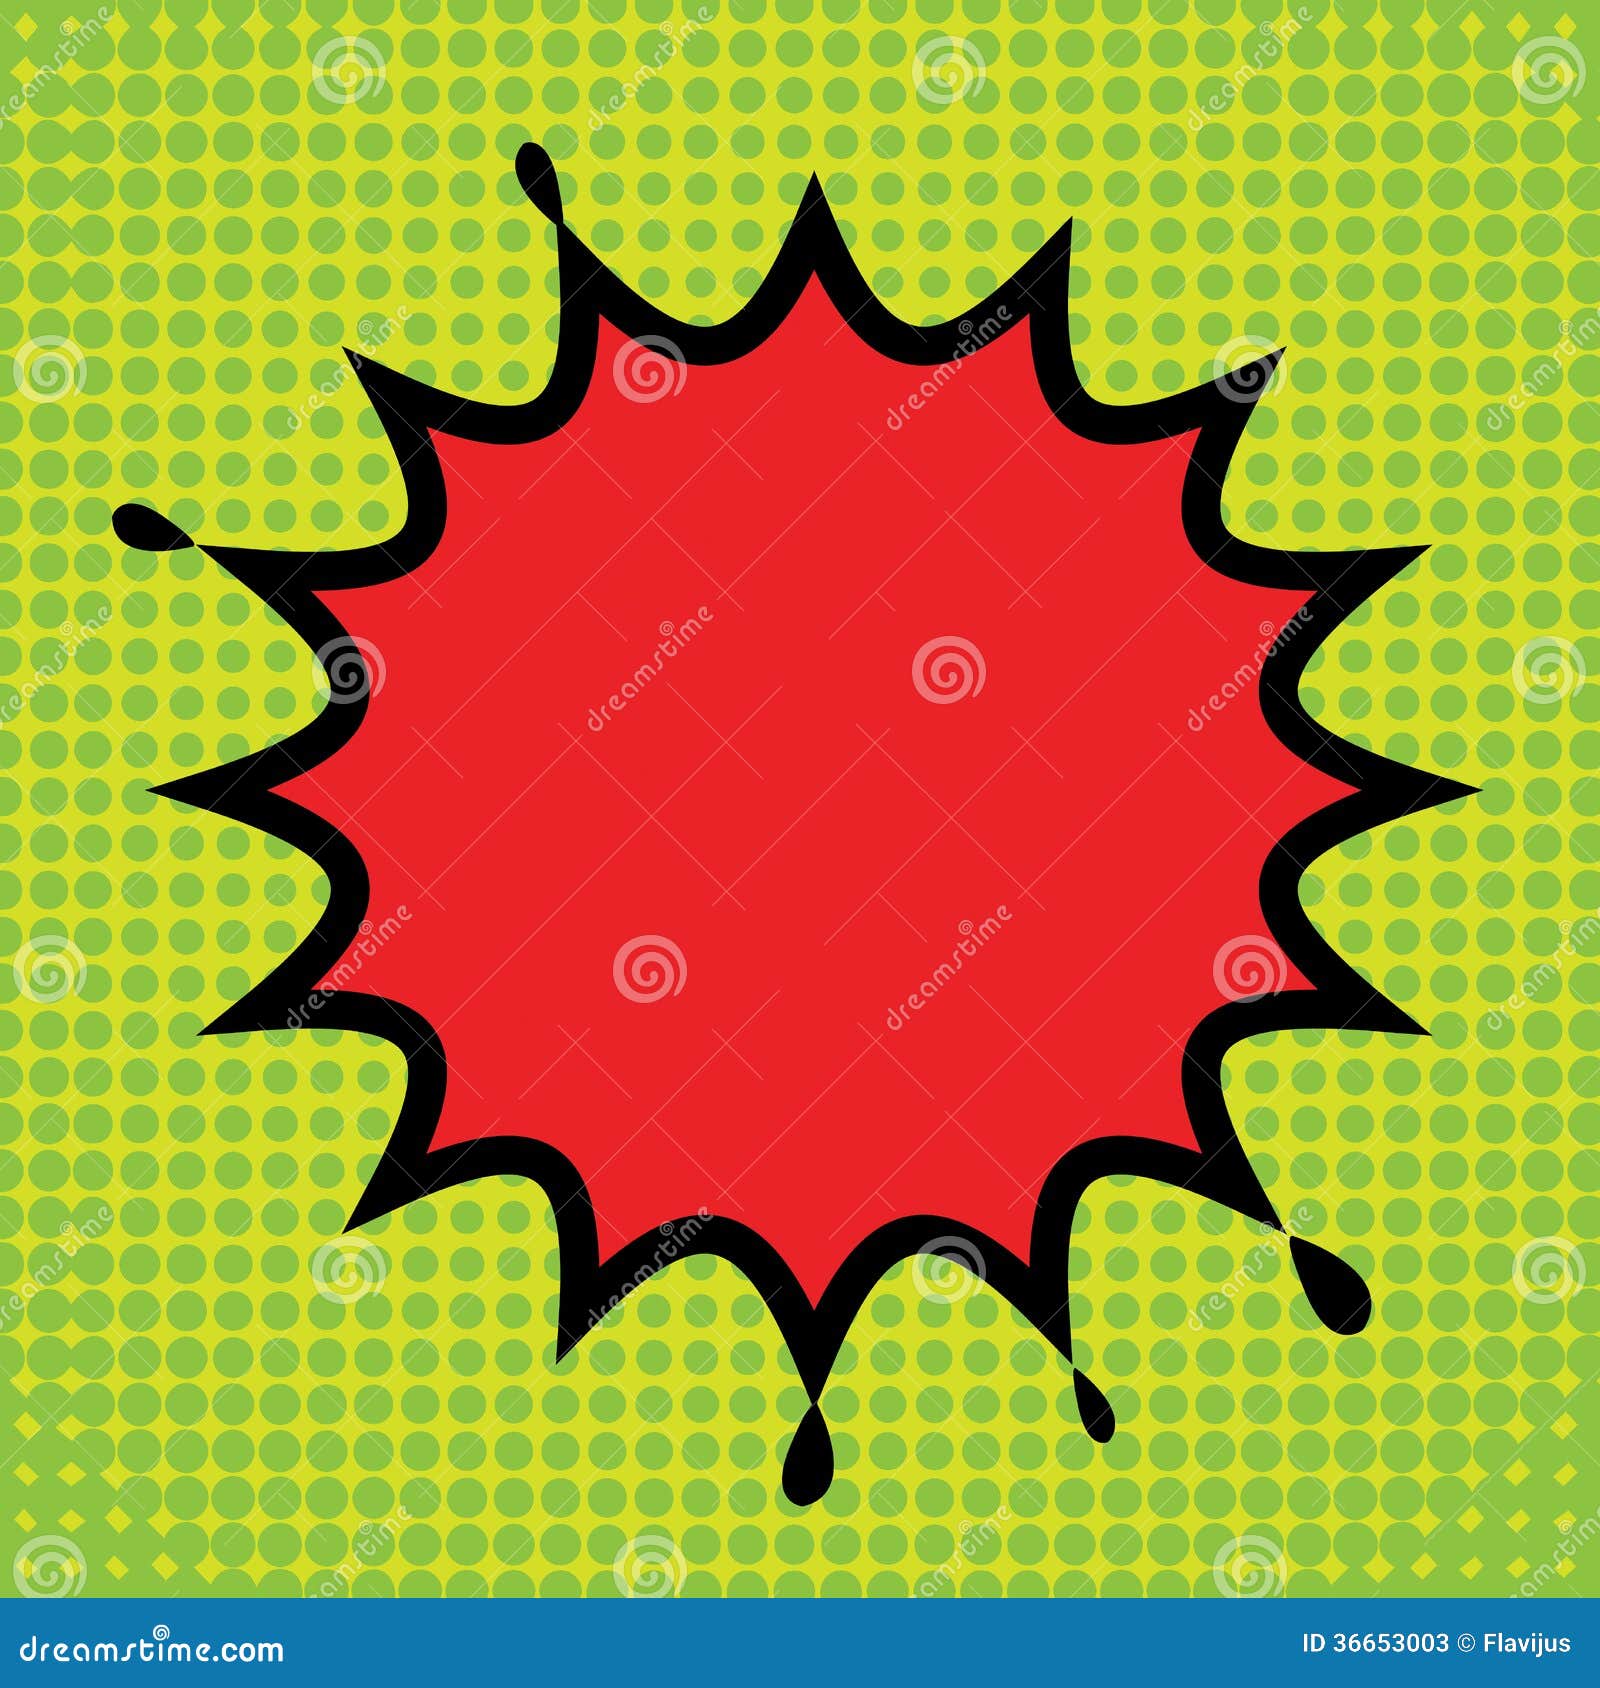 Comic book explosion stock vector. Illustration of action - 36653003